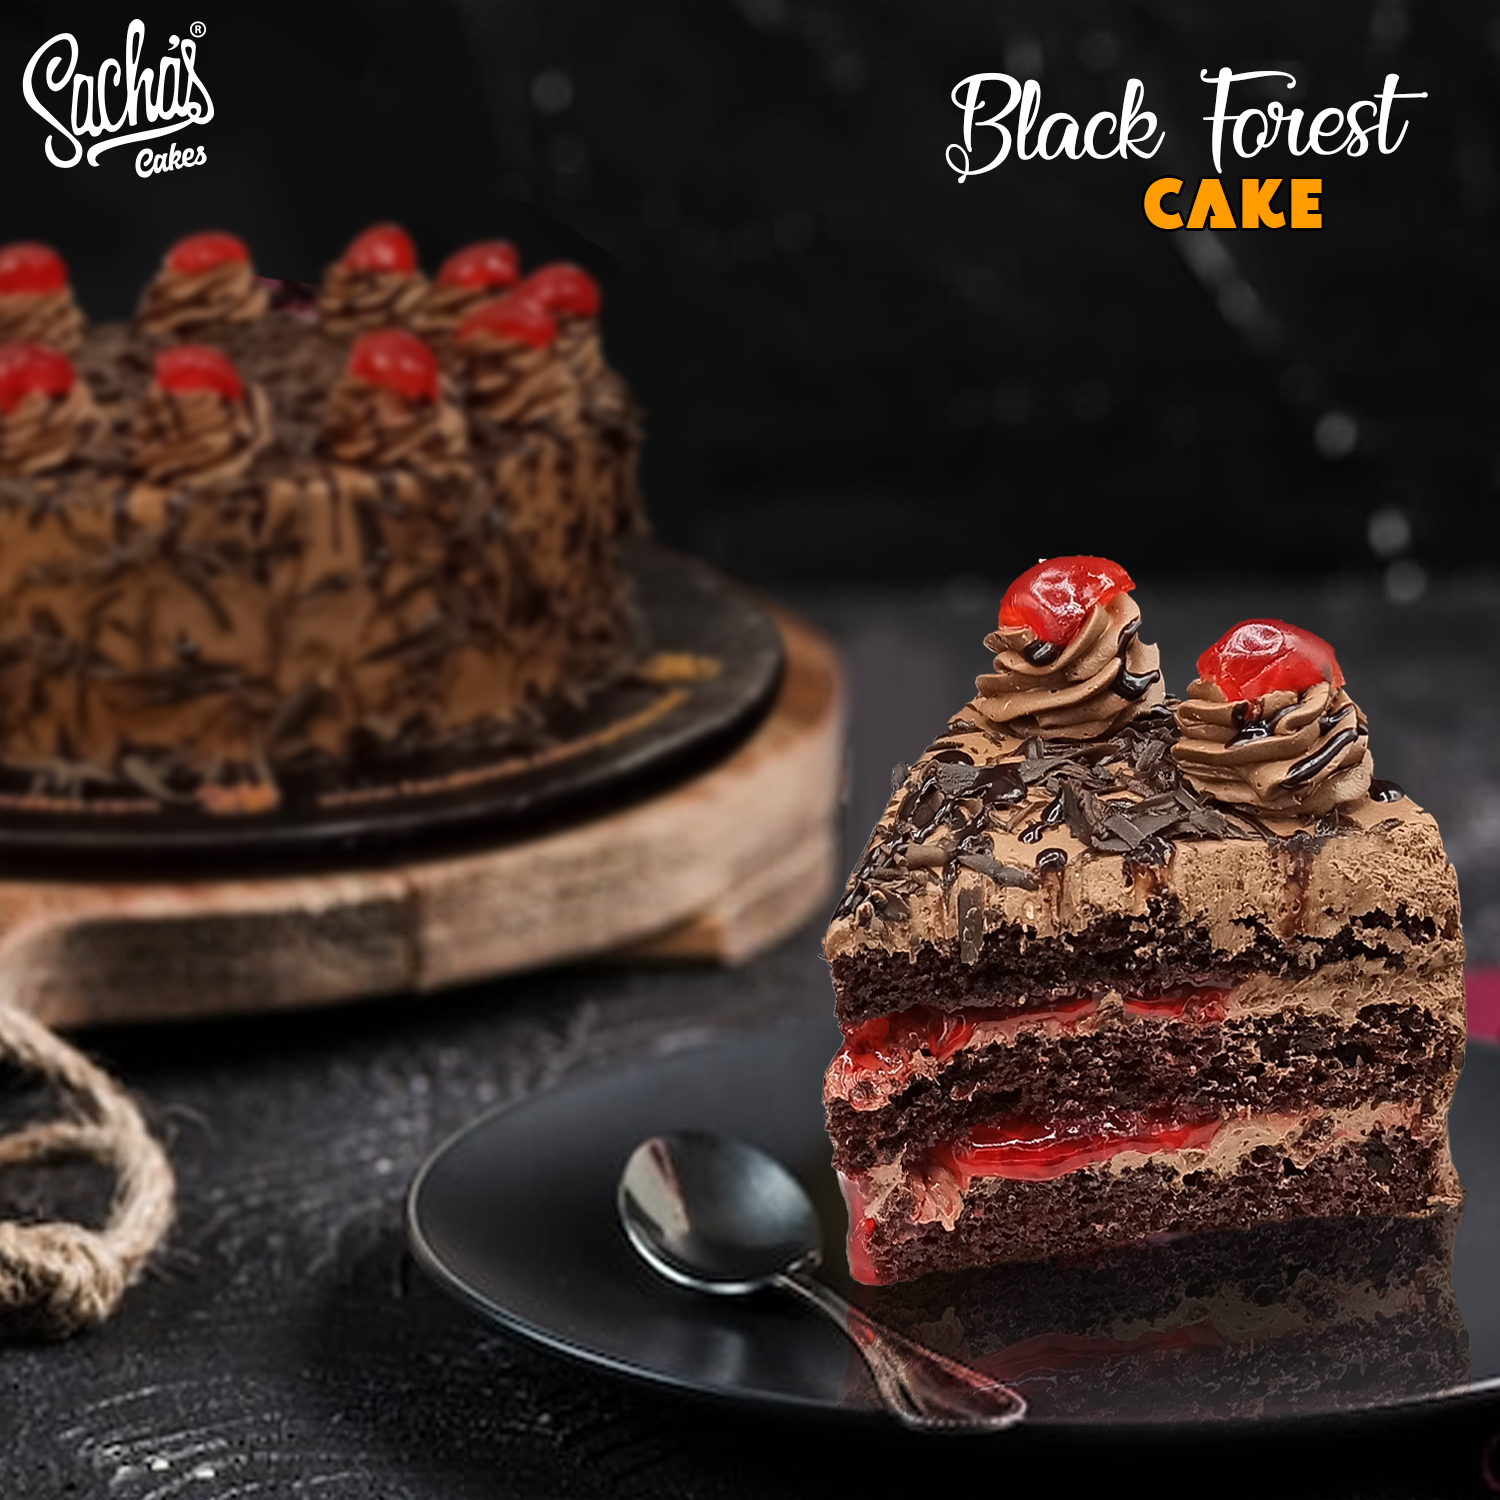 Black Forest Cake - Sweet Recipes for Kids -Easy Chocolate Cake Recipe